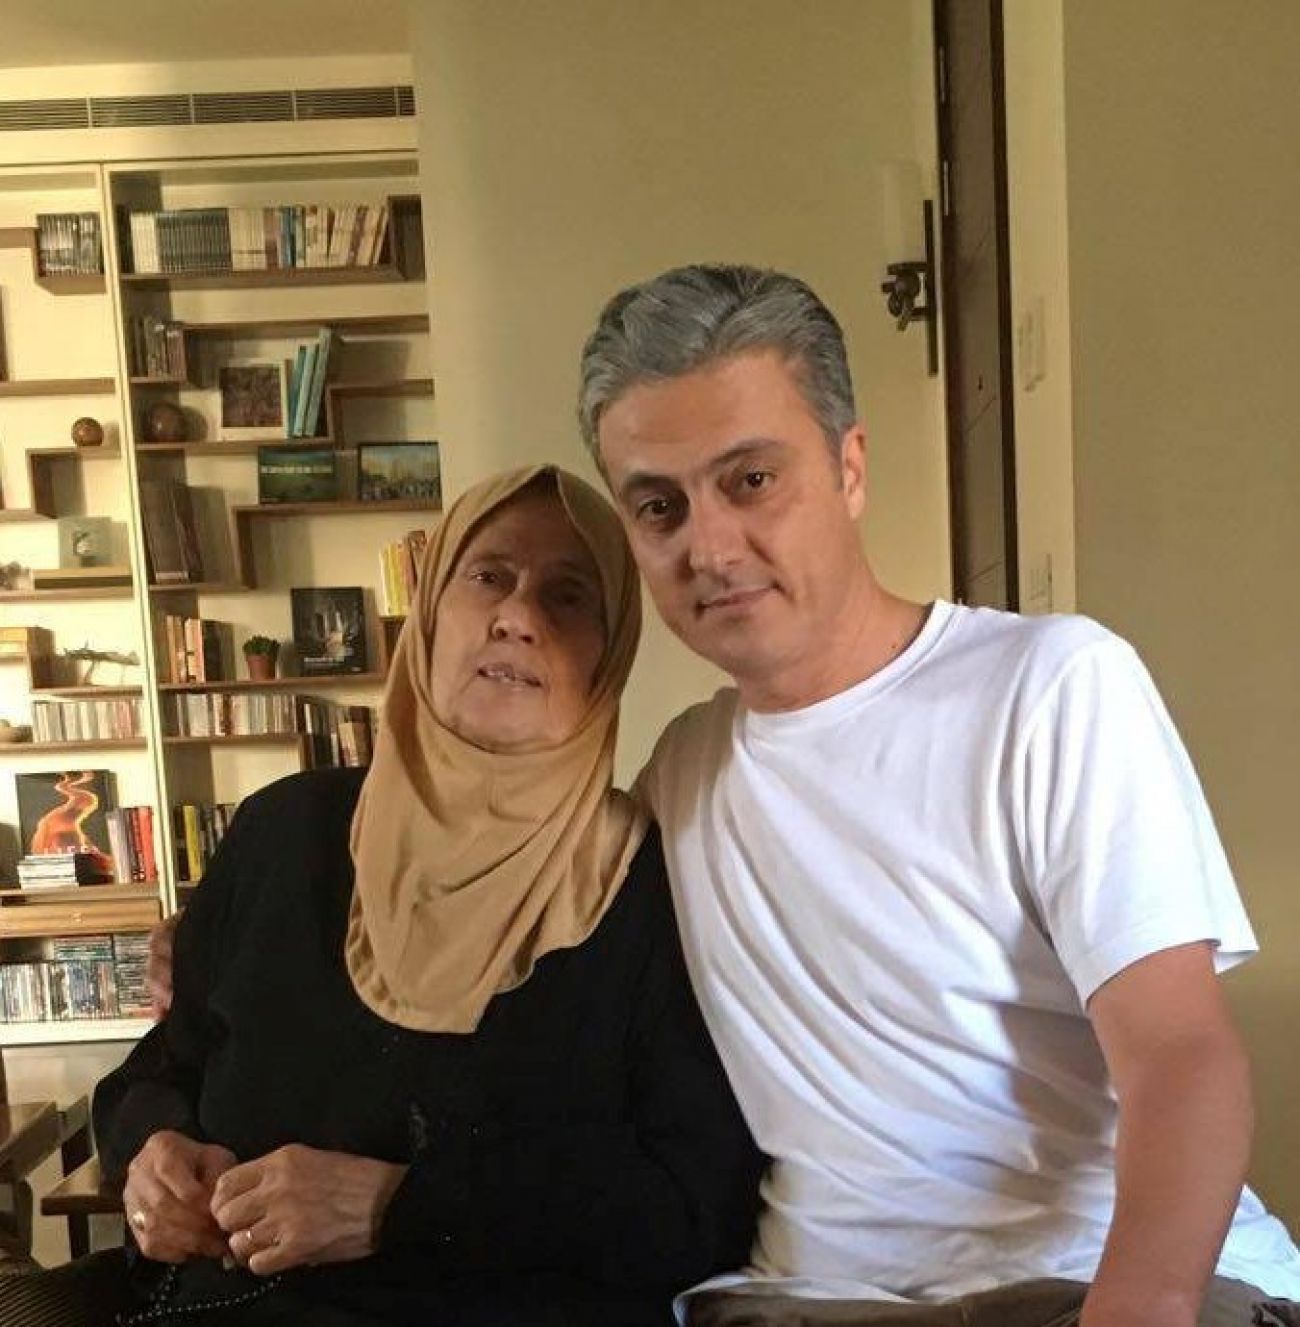 Alaswad and his mother